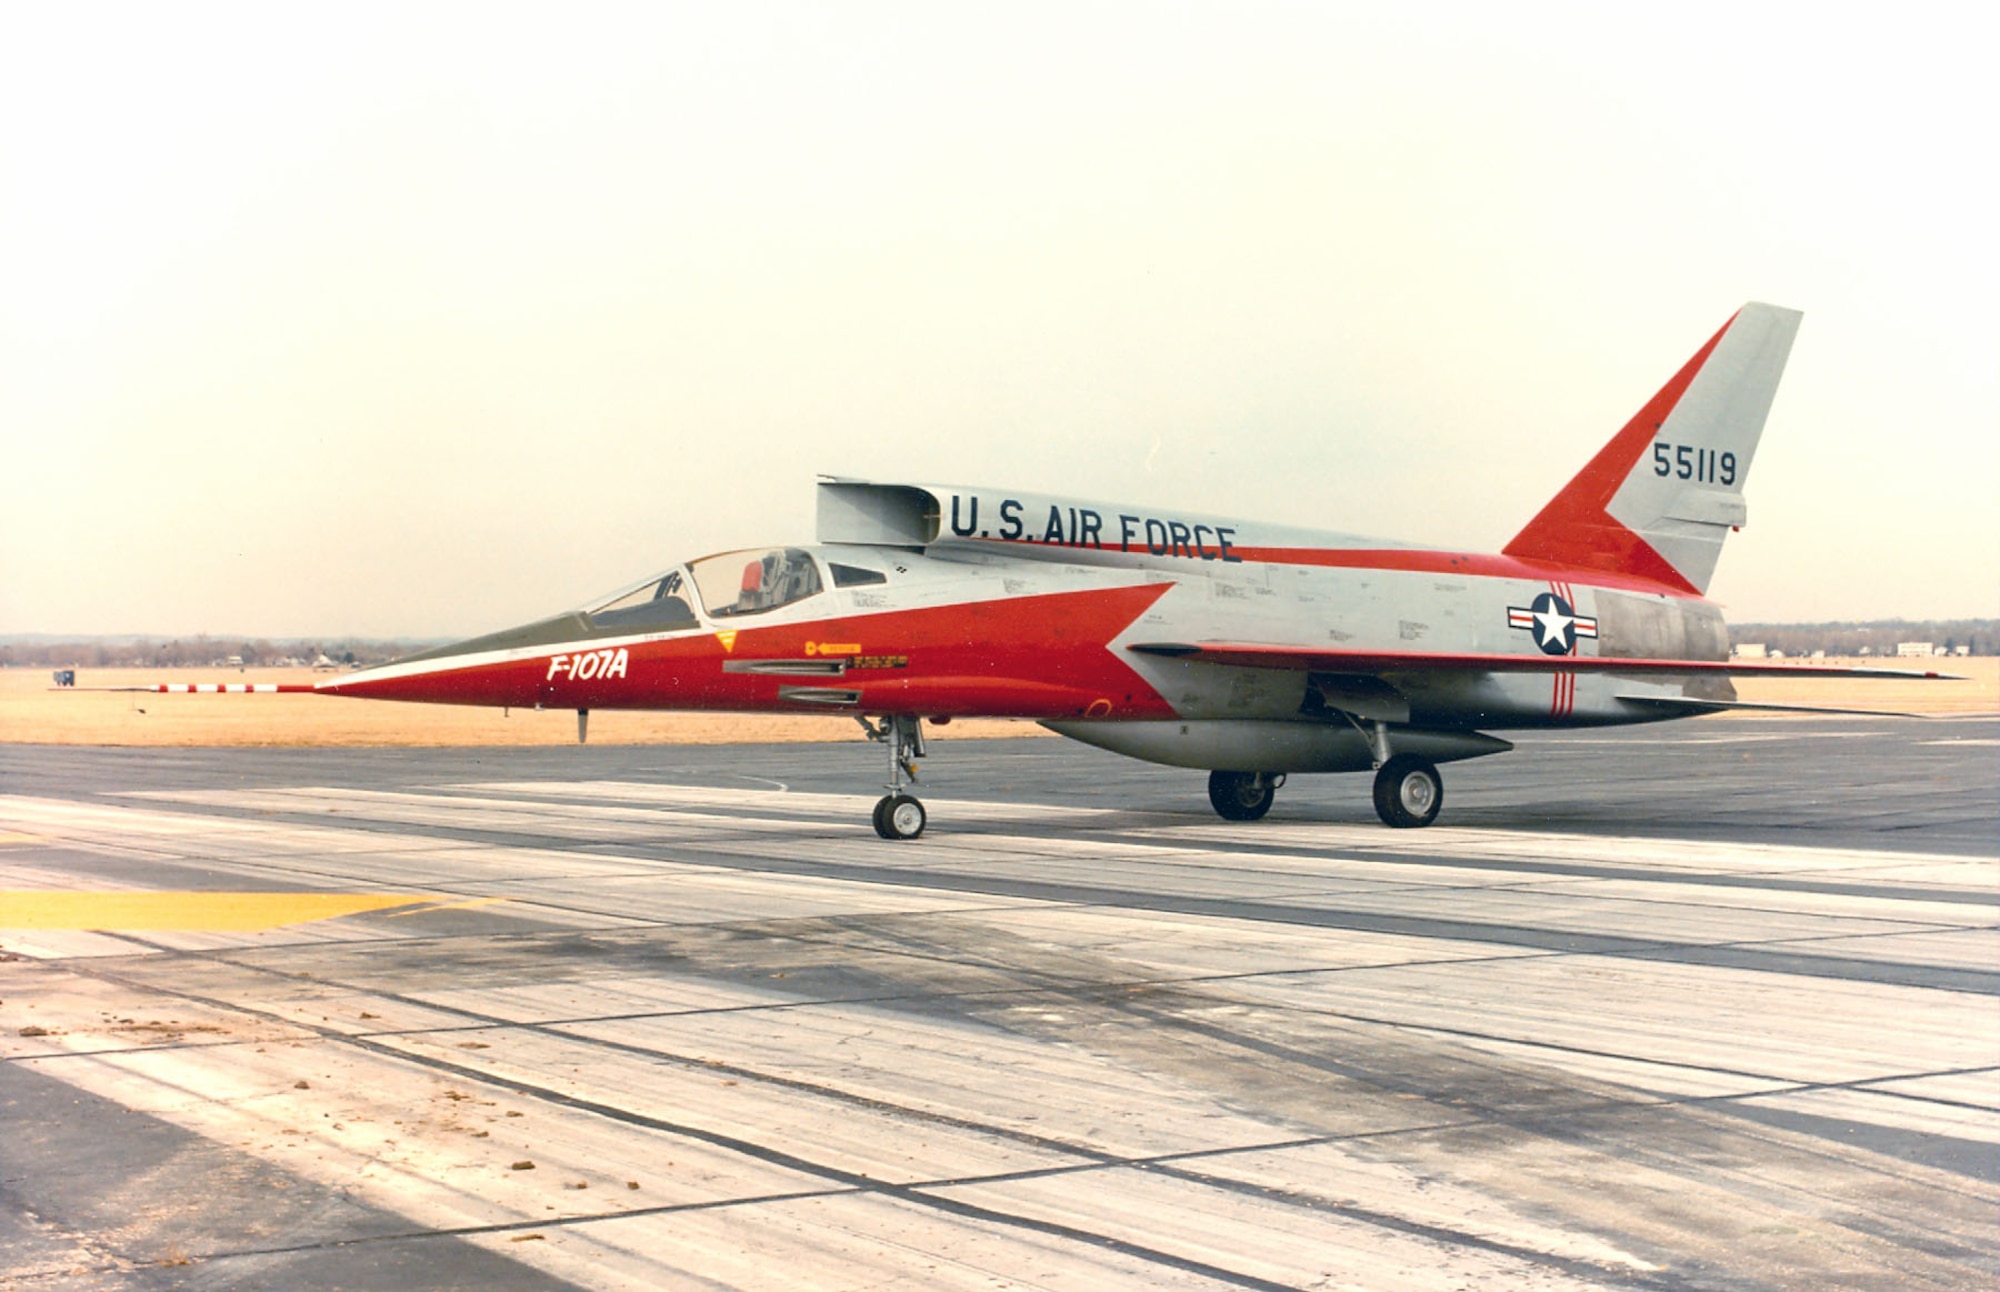 DAYTON, Ohio -- North American F-107A at the National Museum of the United States Air Force. (U.S. Air Force photo)